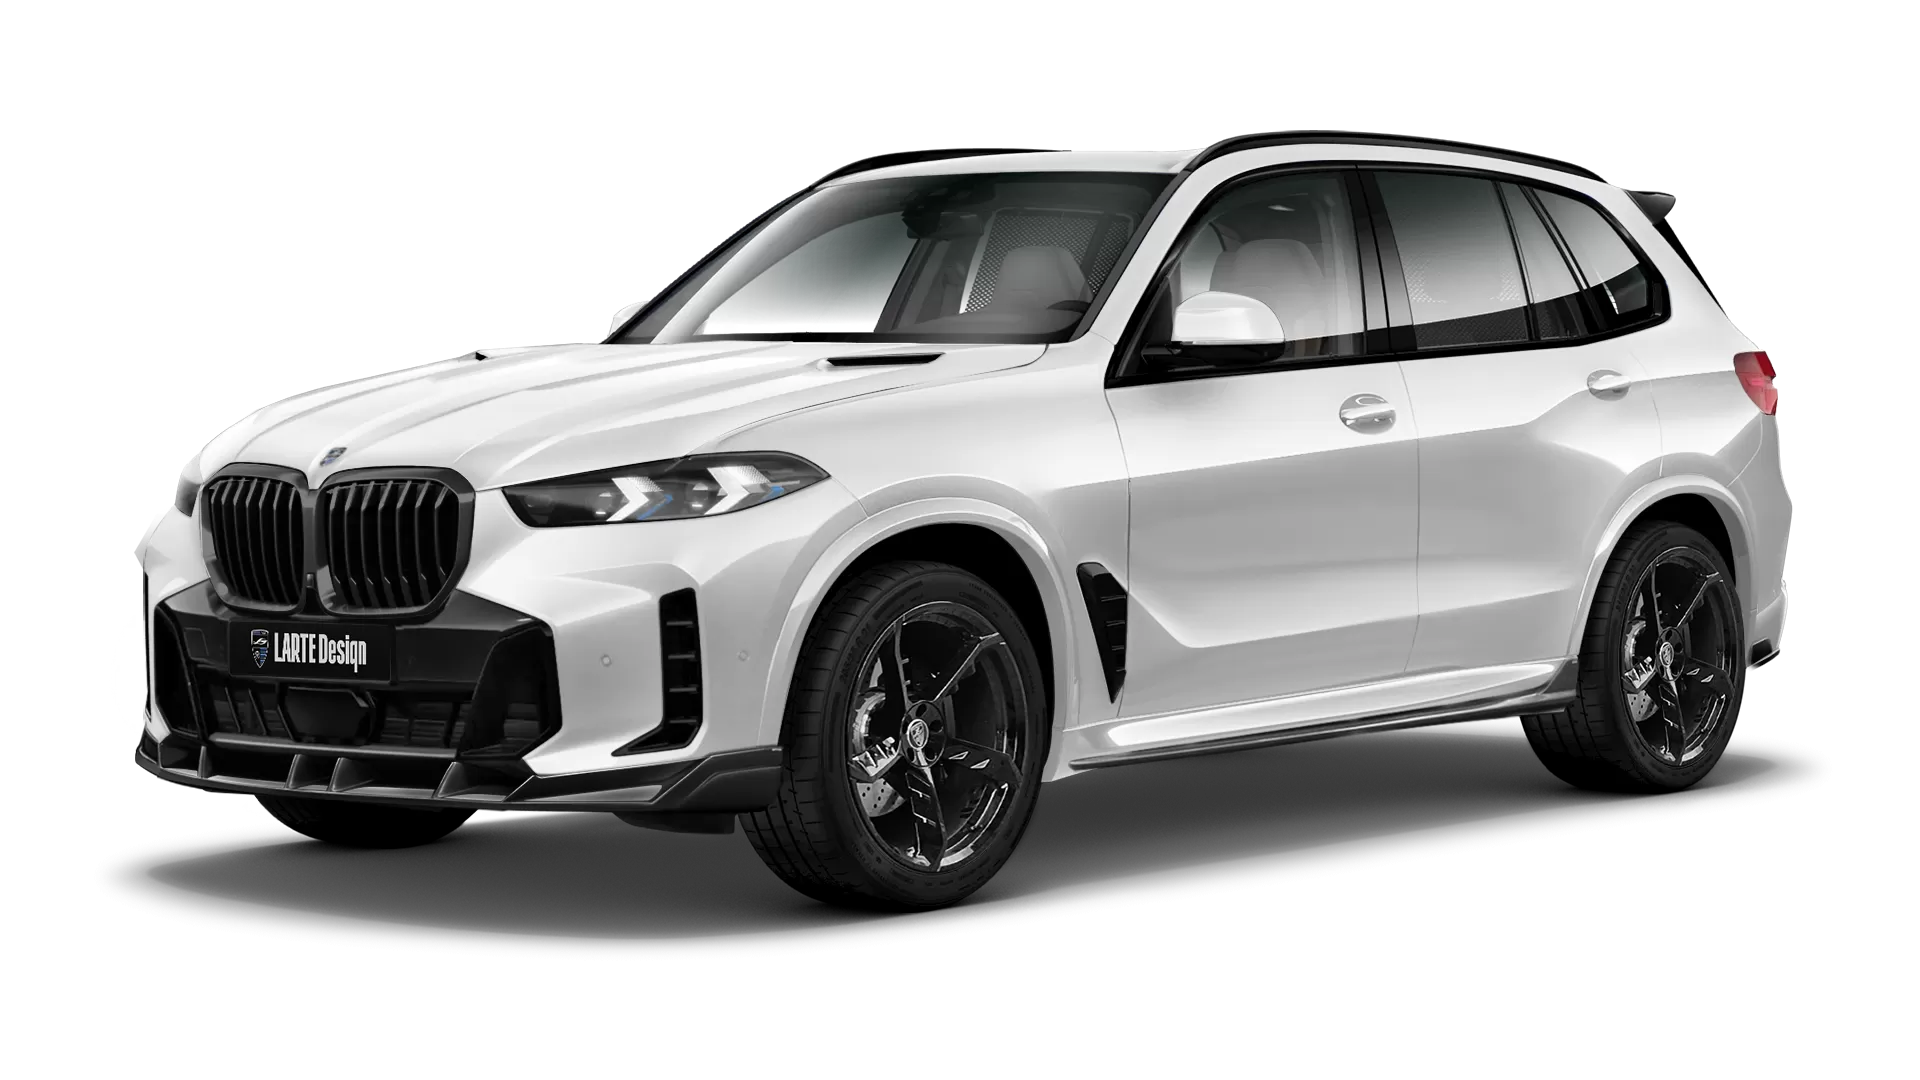 BMW X5 G05 LCI Facelift with painted body kit: front view shown in Mineral White